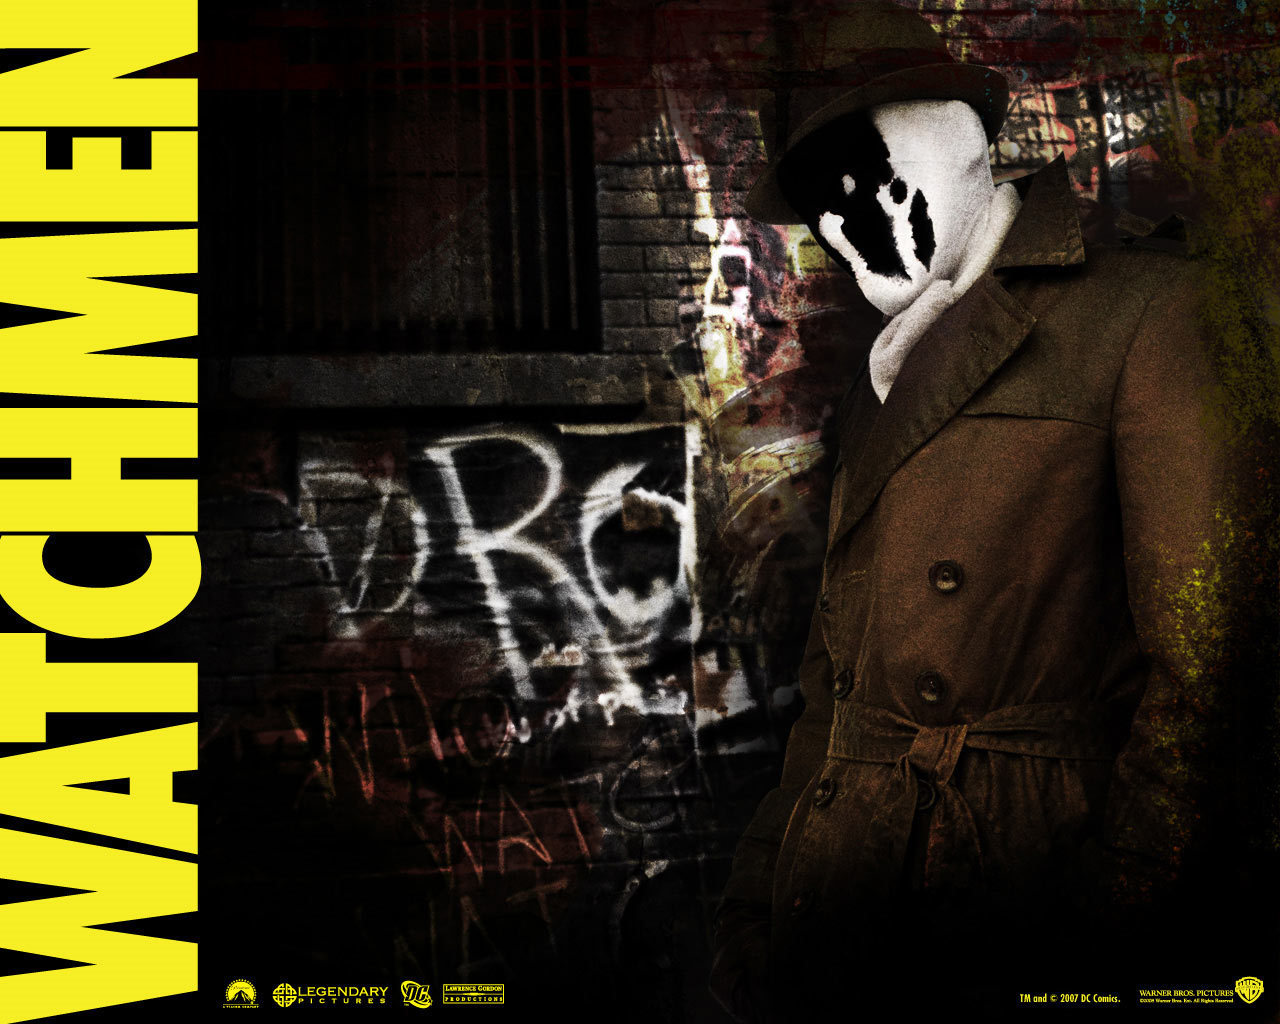 Rorschach Image HD Wallpaper And Background